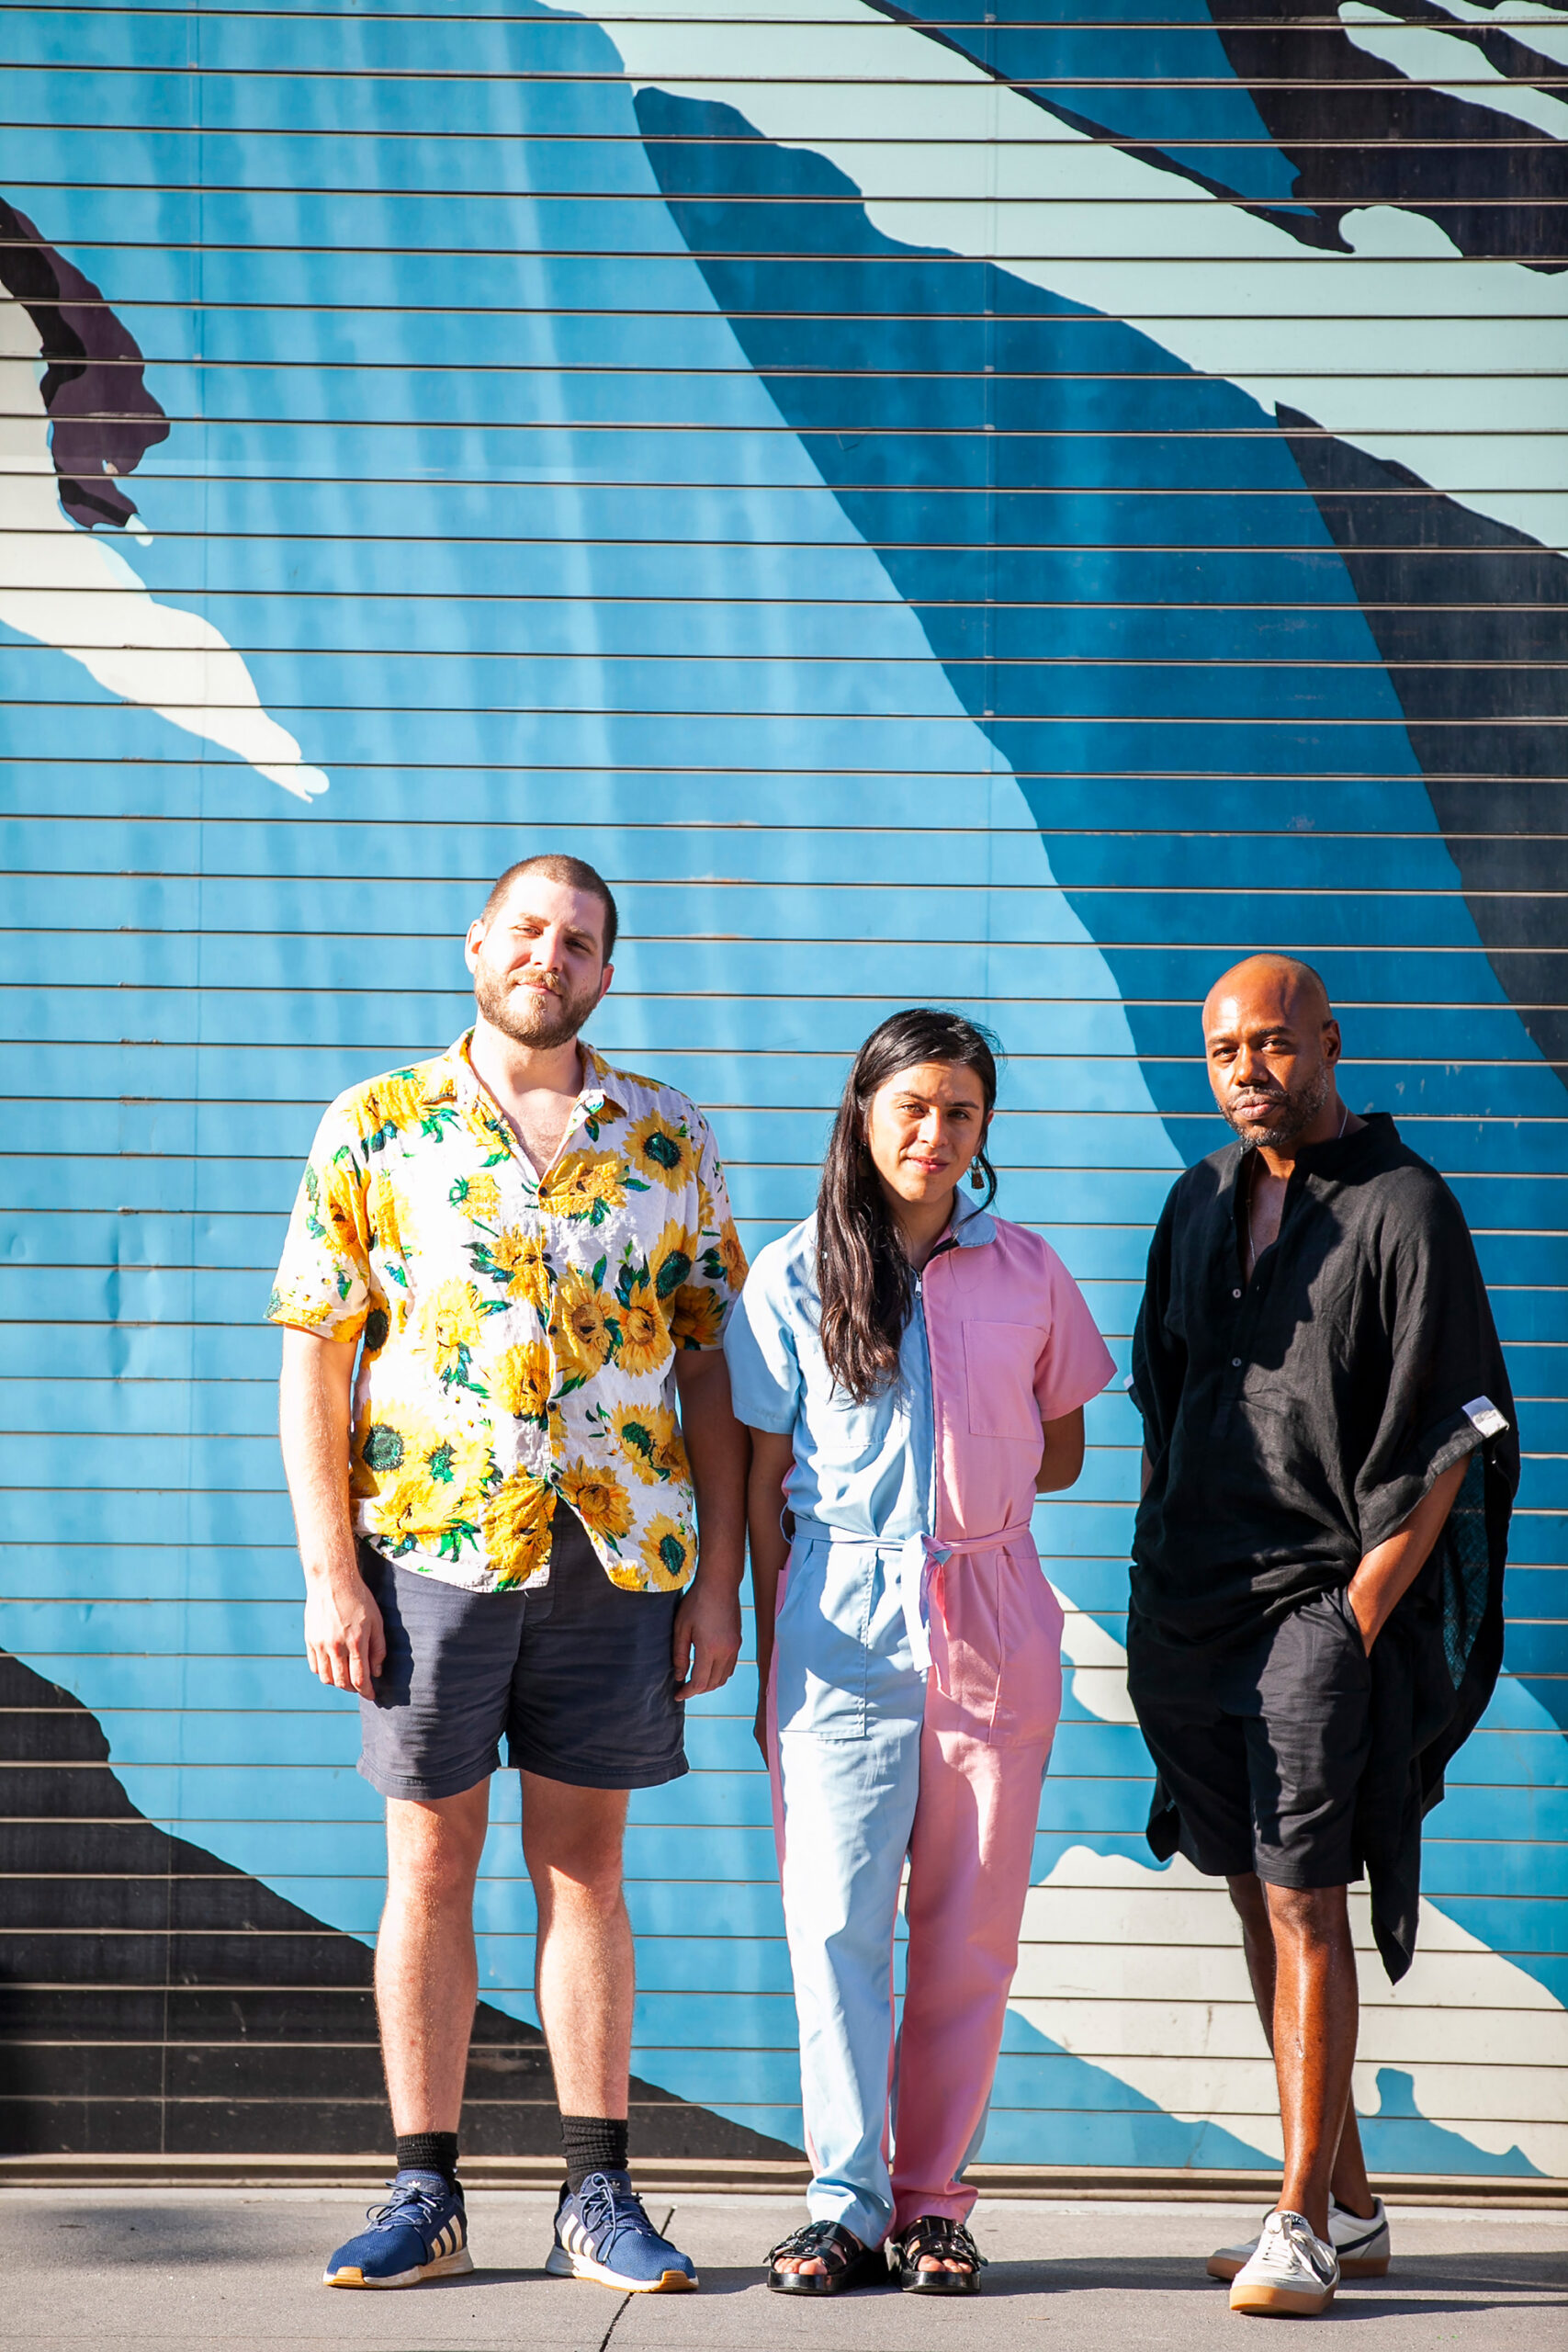 Roo a light-toned male with a flowery top and gray shorts, Seba, a medium-toned person in a pink and gray jumpsuit and Marton, a black man in all black shorts set, stand in front of a blue and black mural.